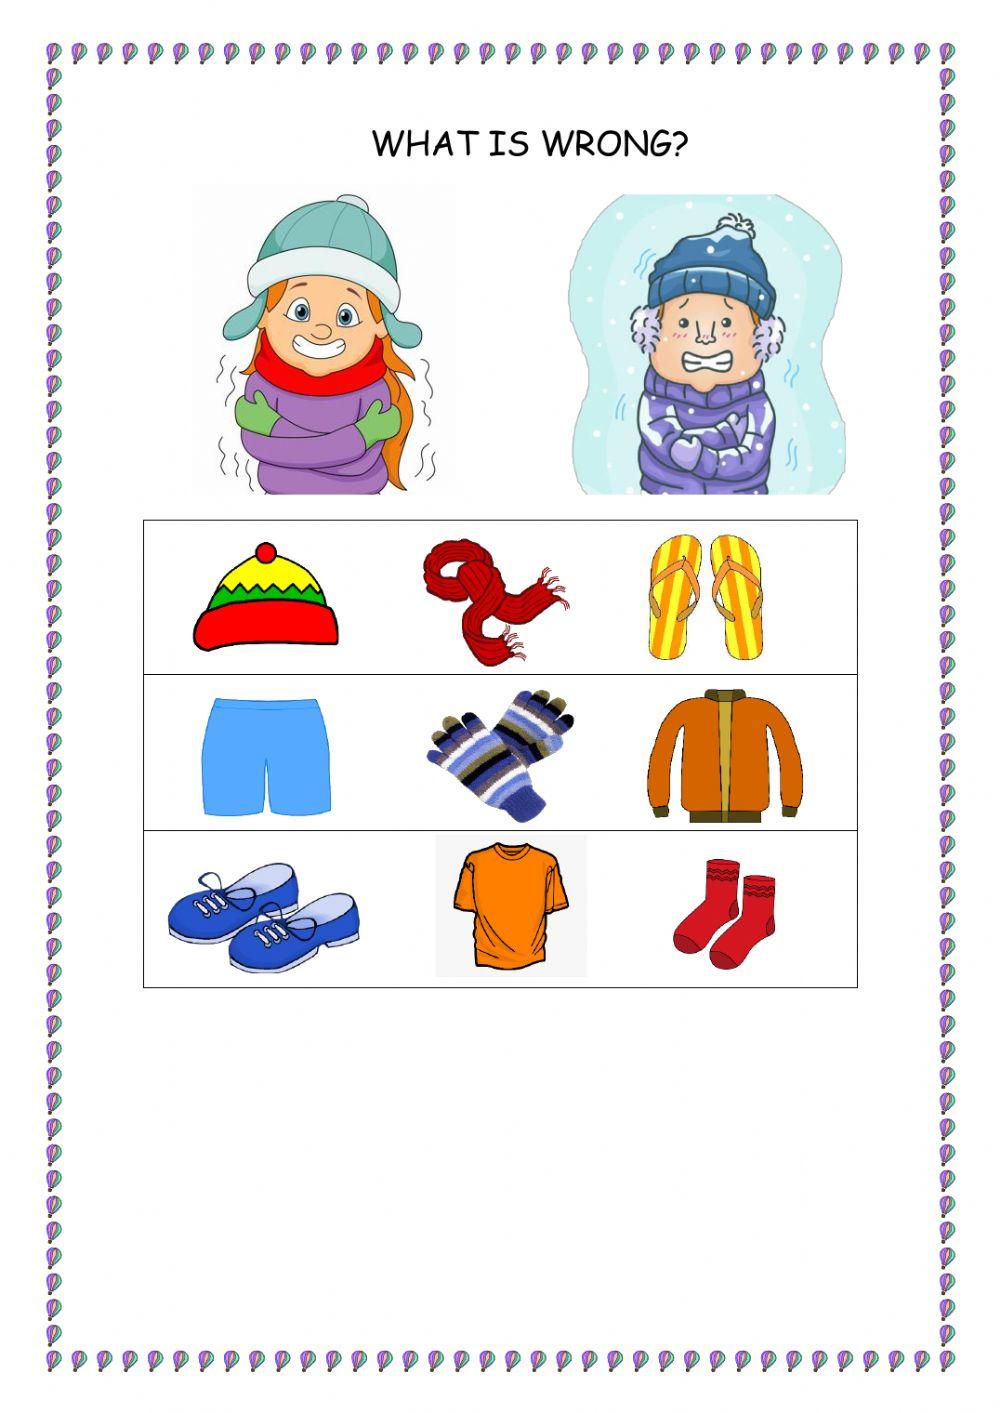 Winter clothes - Choose the odd one out